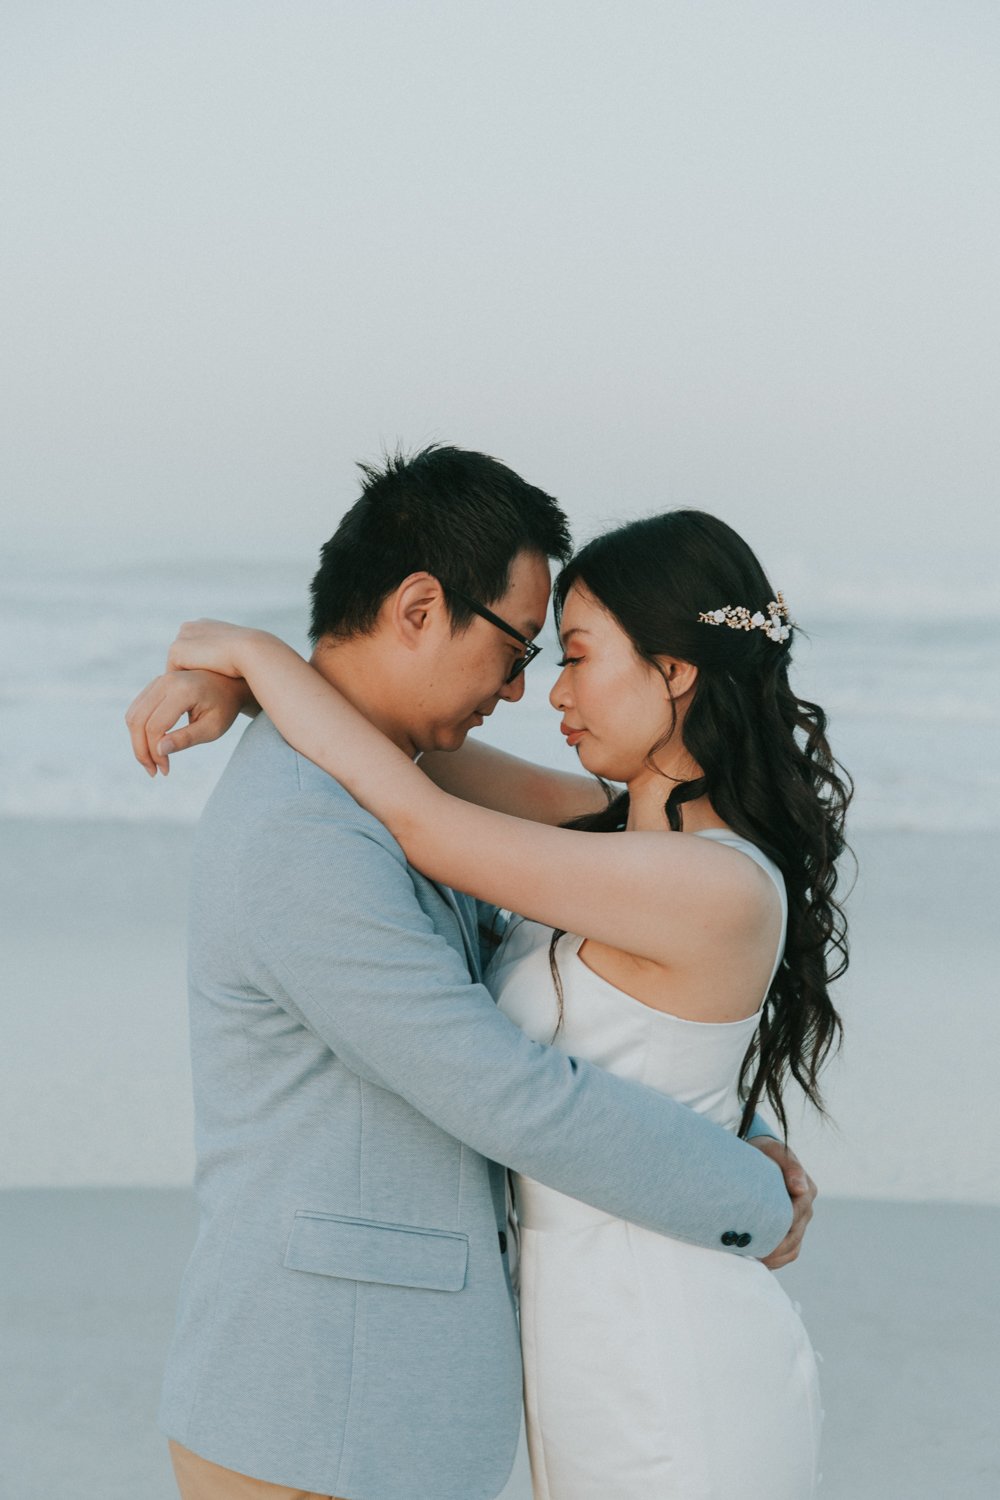 Wedding Shoot in Cape Town - Bianca Asher Photography-13.jpg